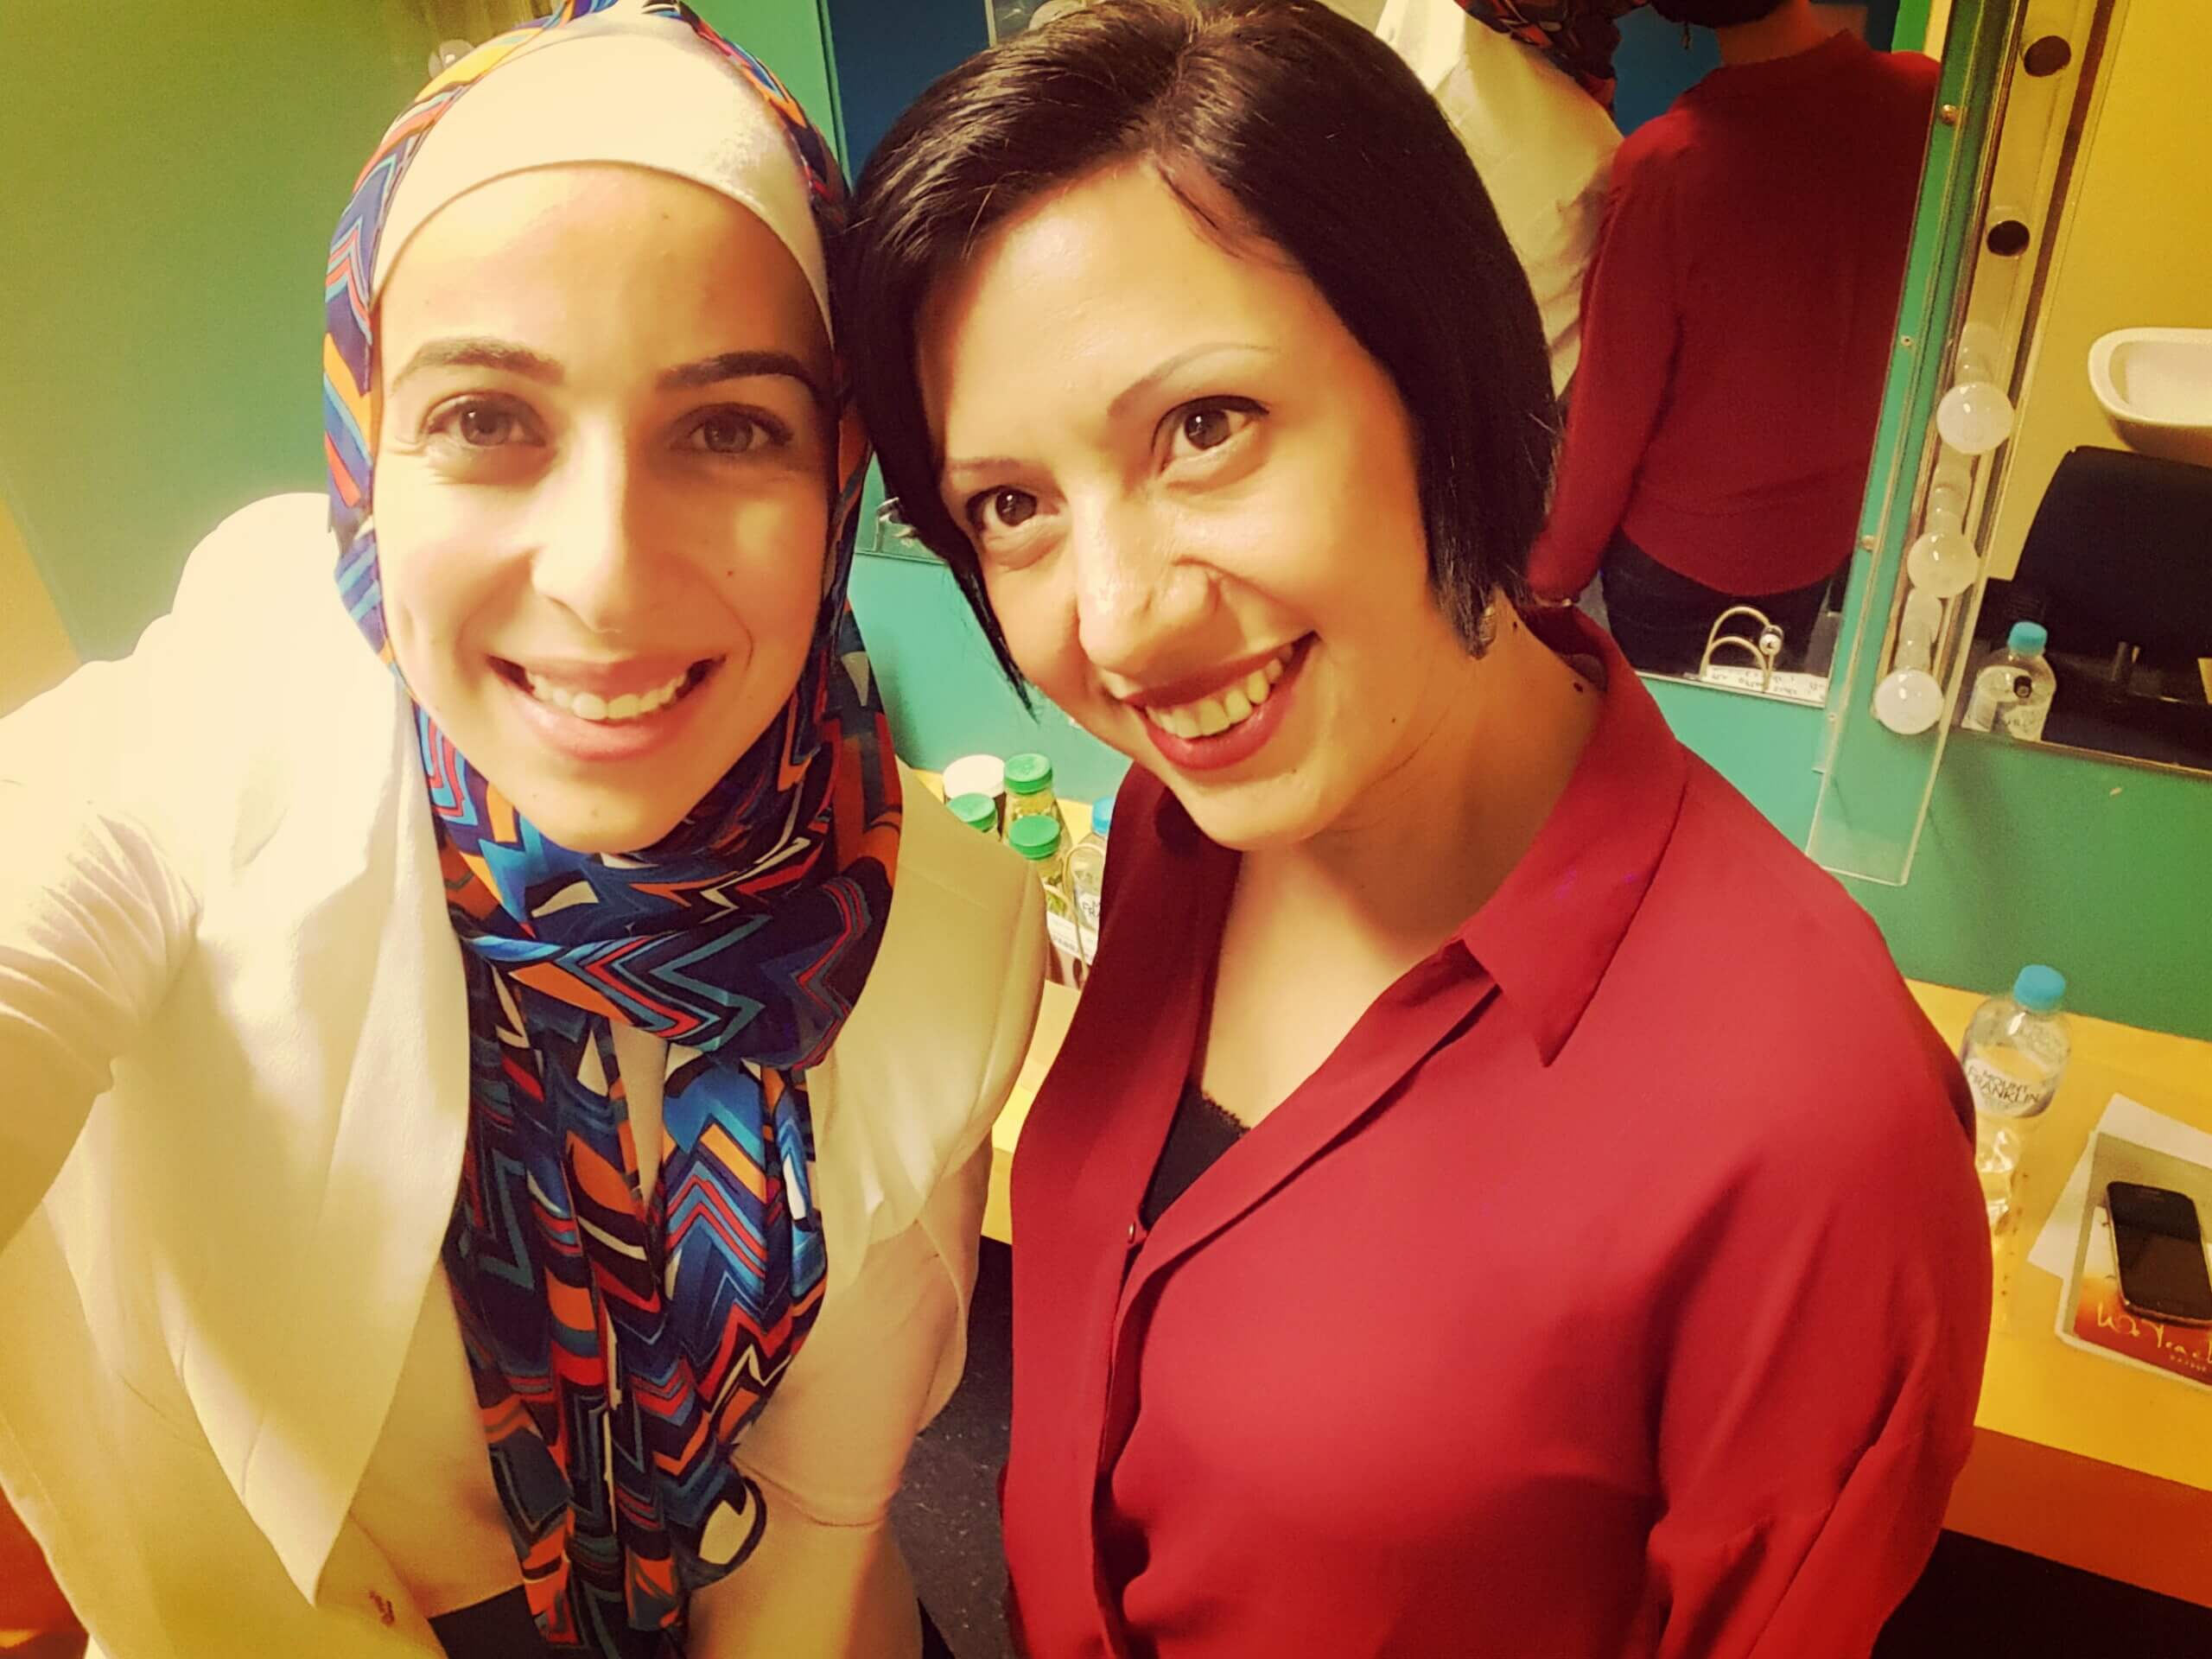 Sara caught up with Rafeef Ziadah backstage at her Sydney performance of "We Teach Life".